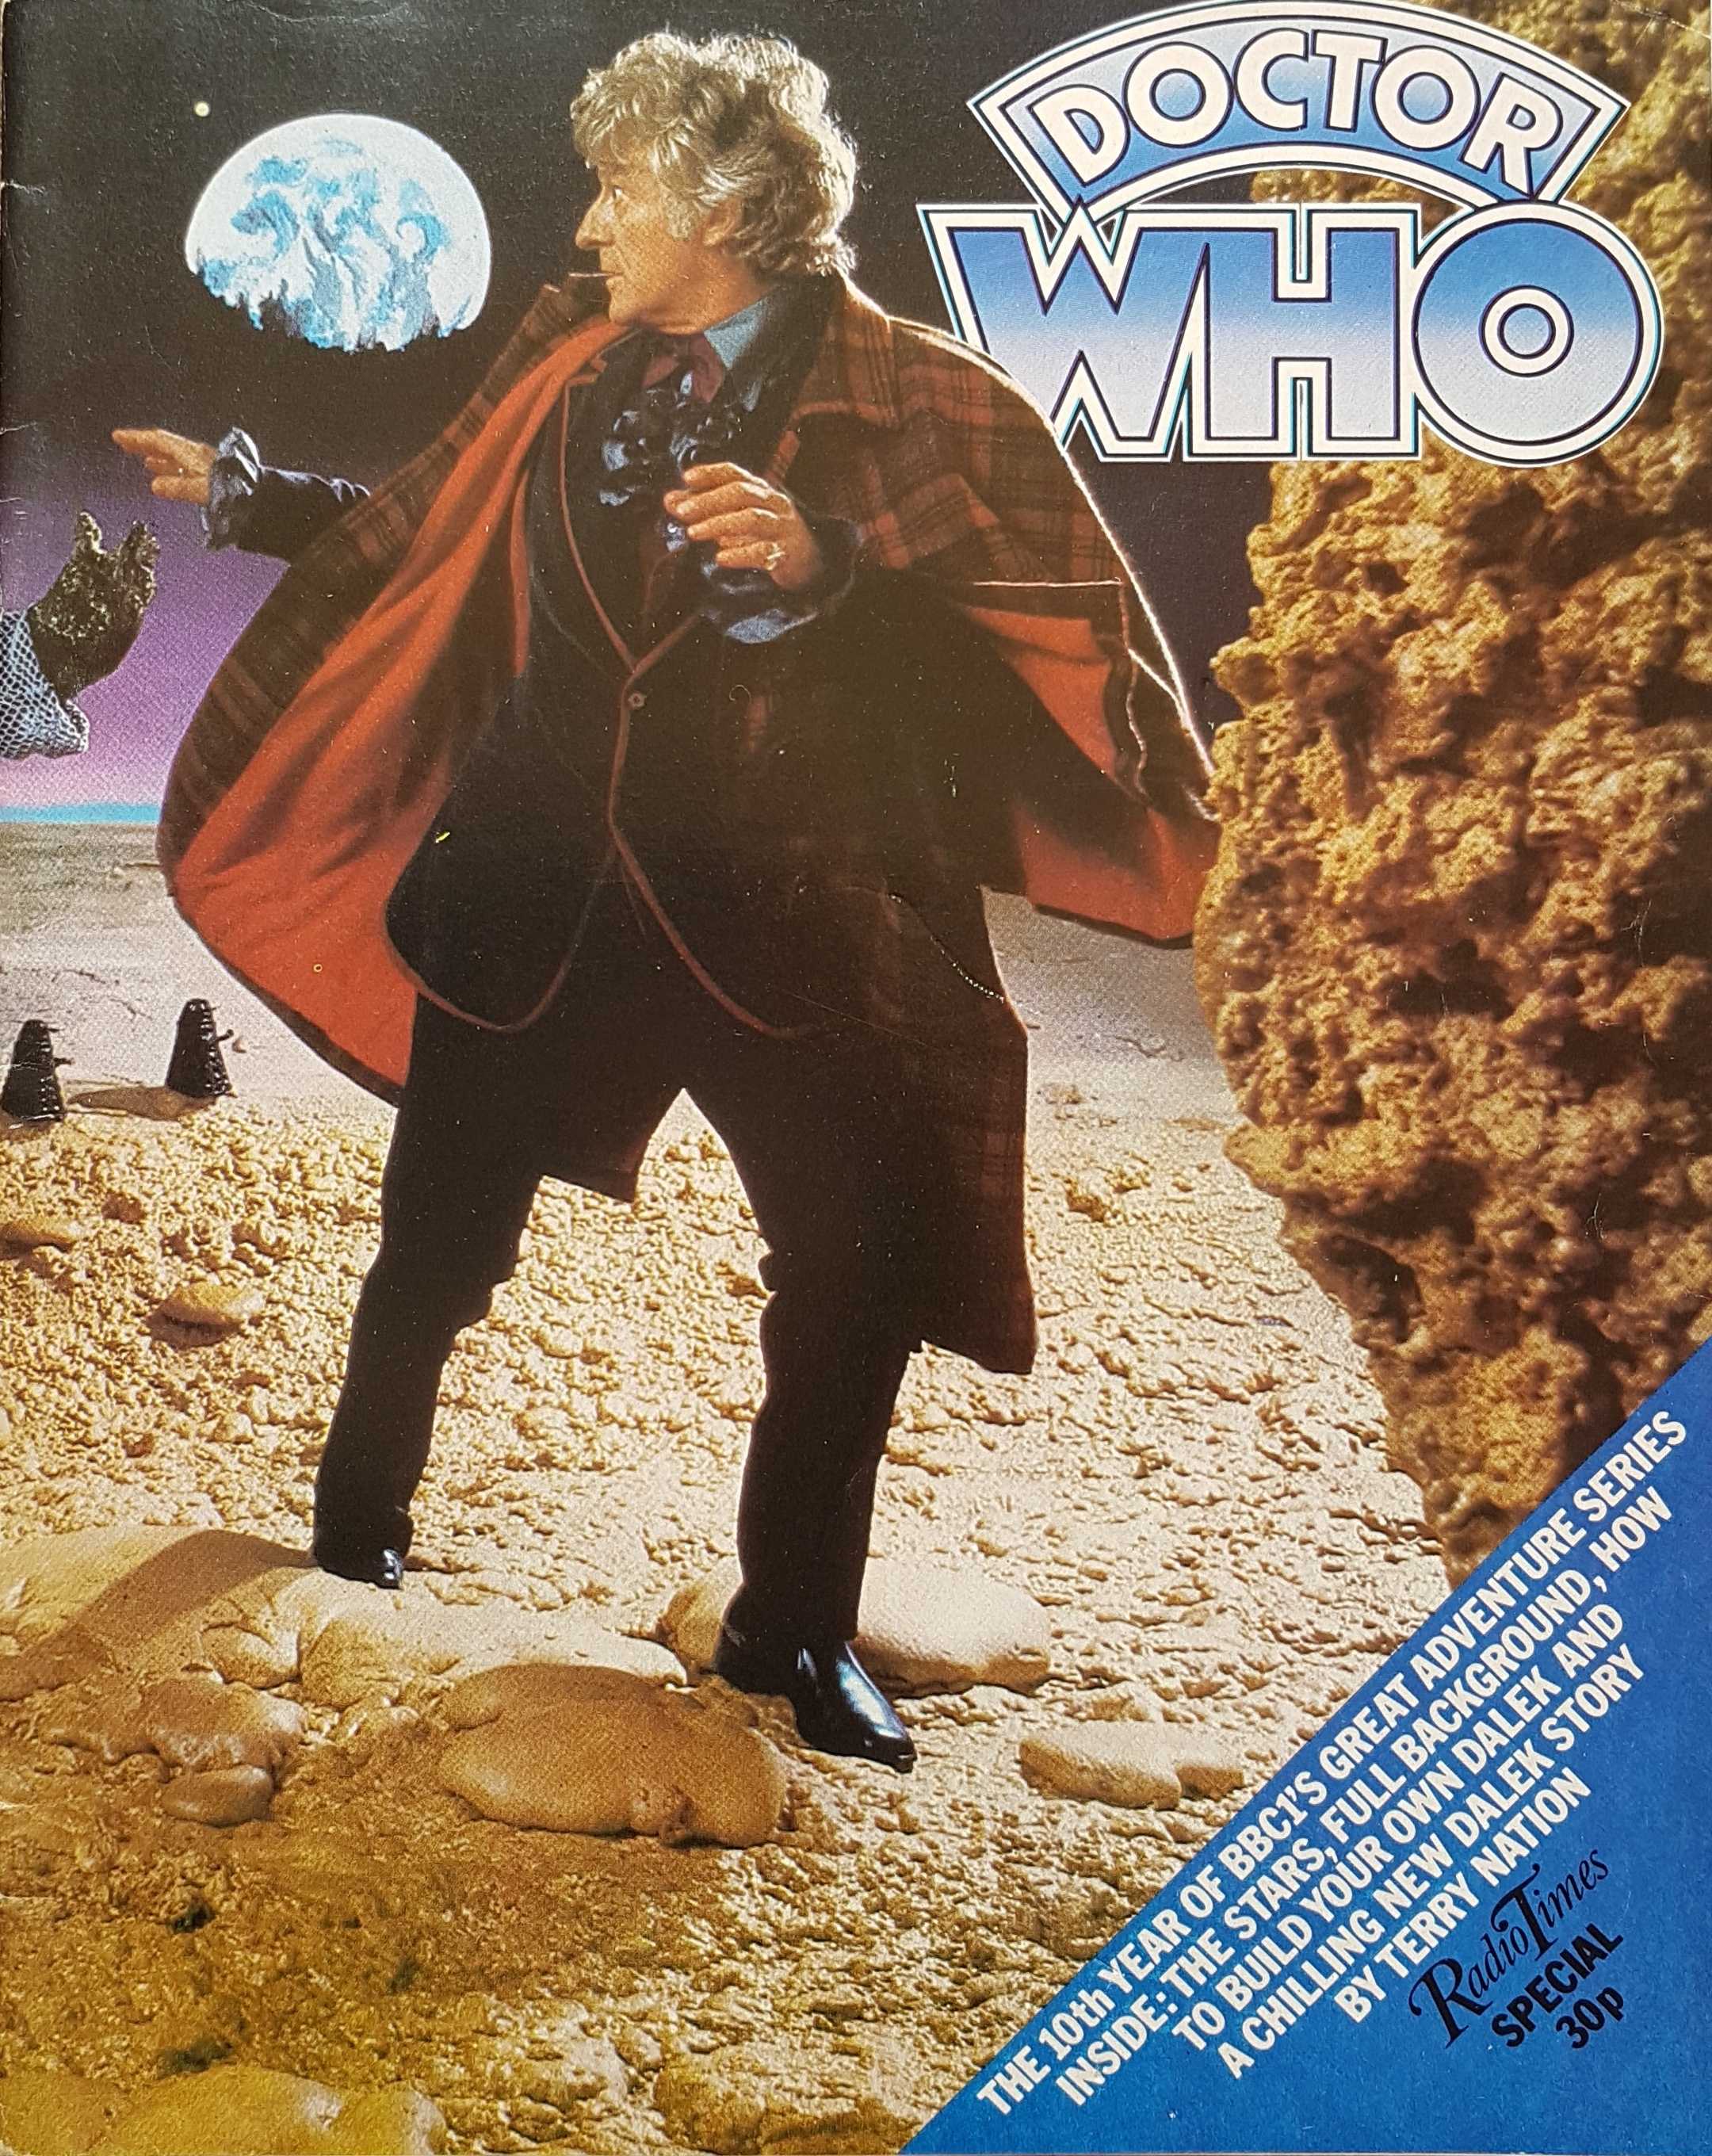 Picture of Radio Times - Doctor Who Special by artist Various from the BBC magazines - Records and Tapes library